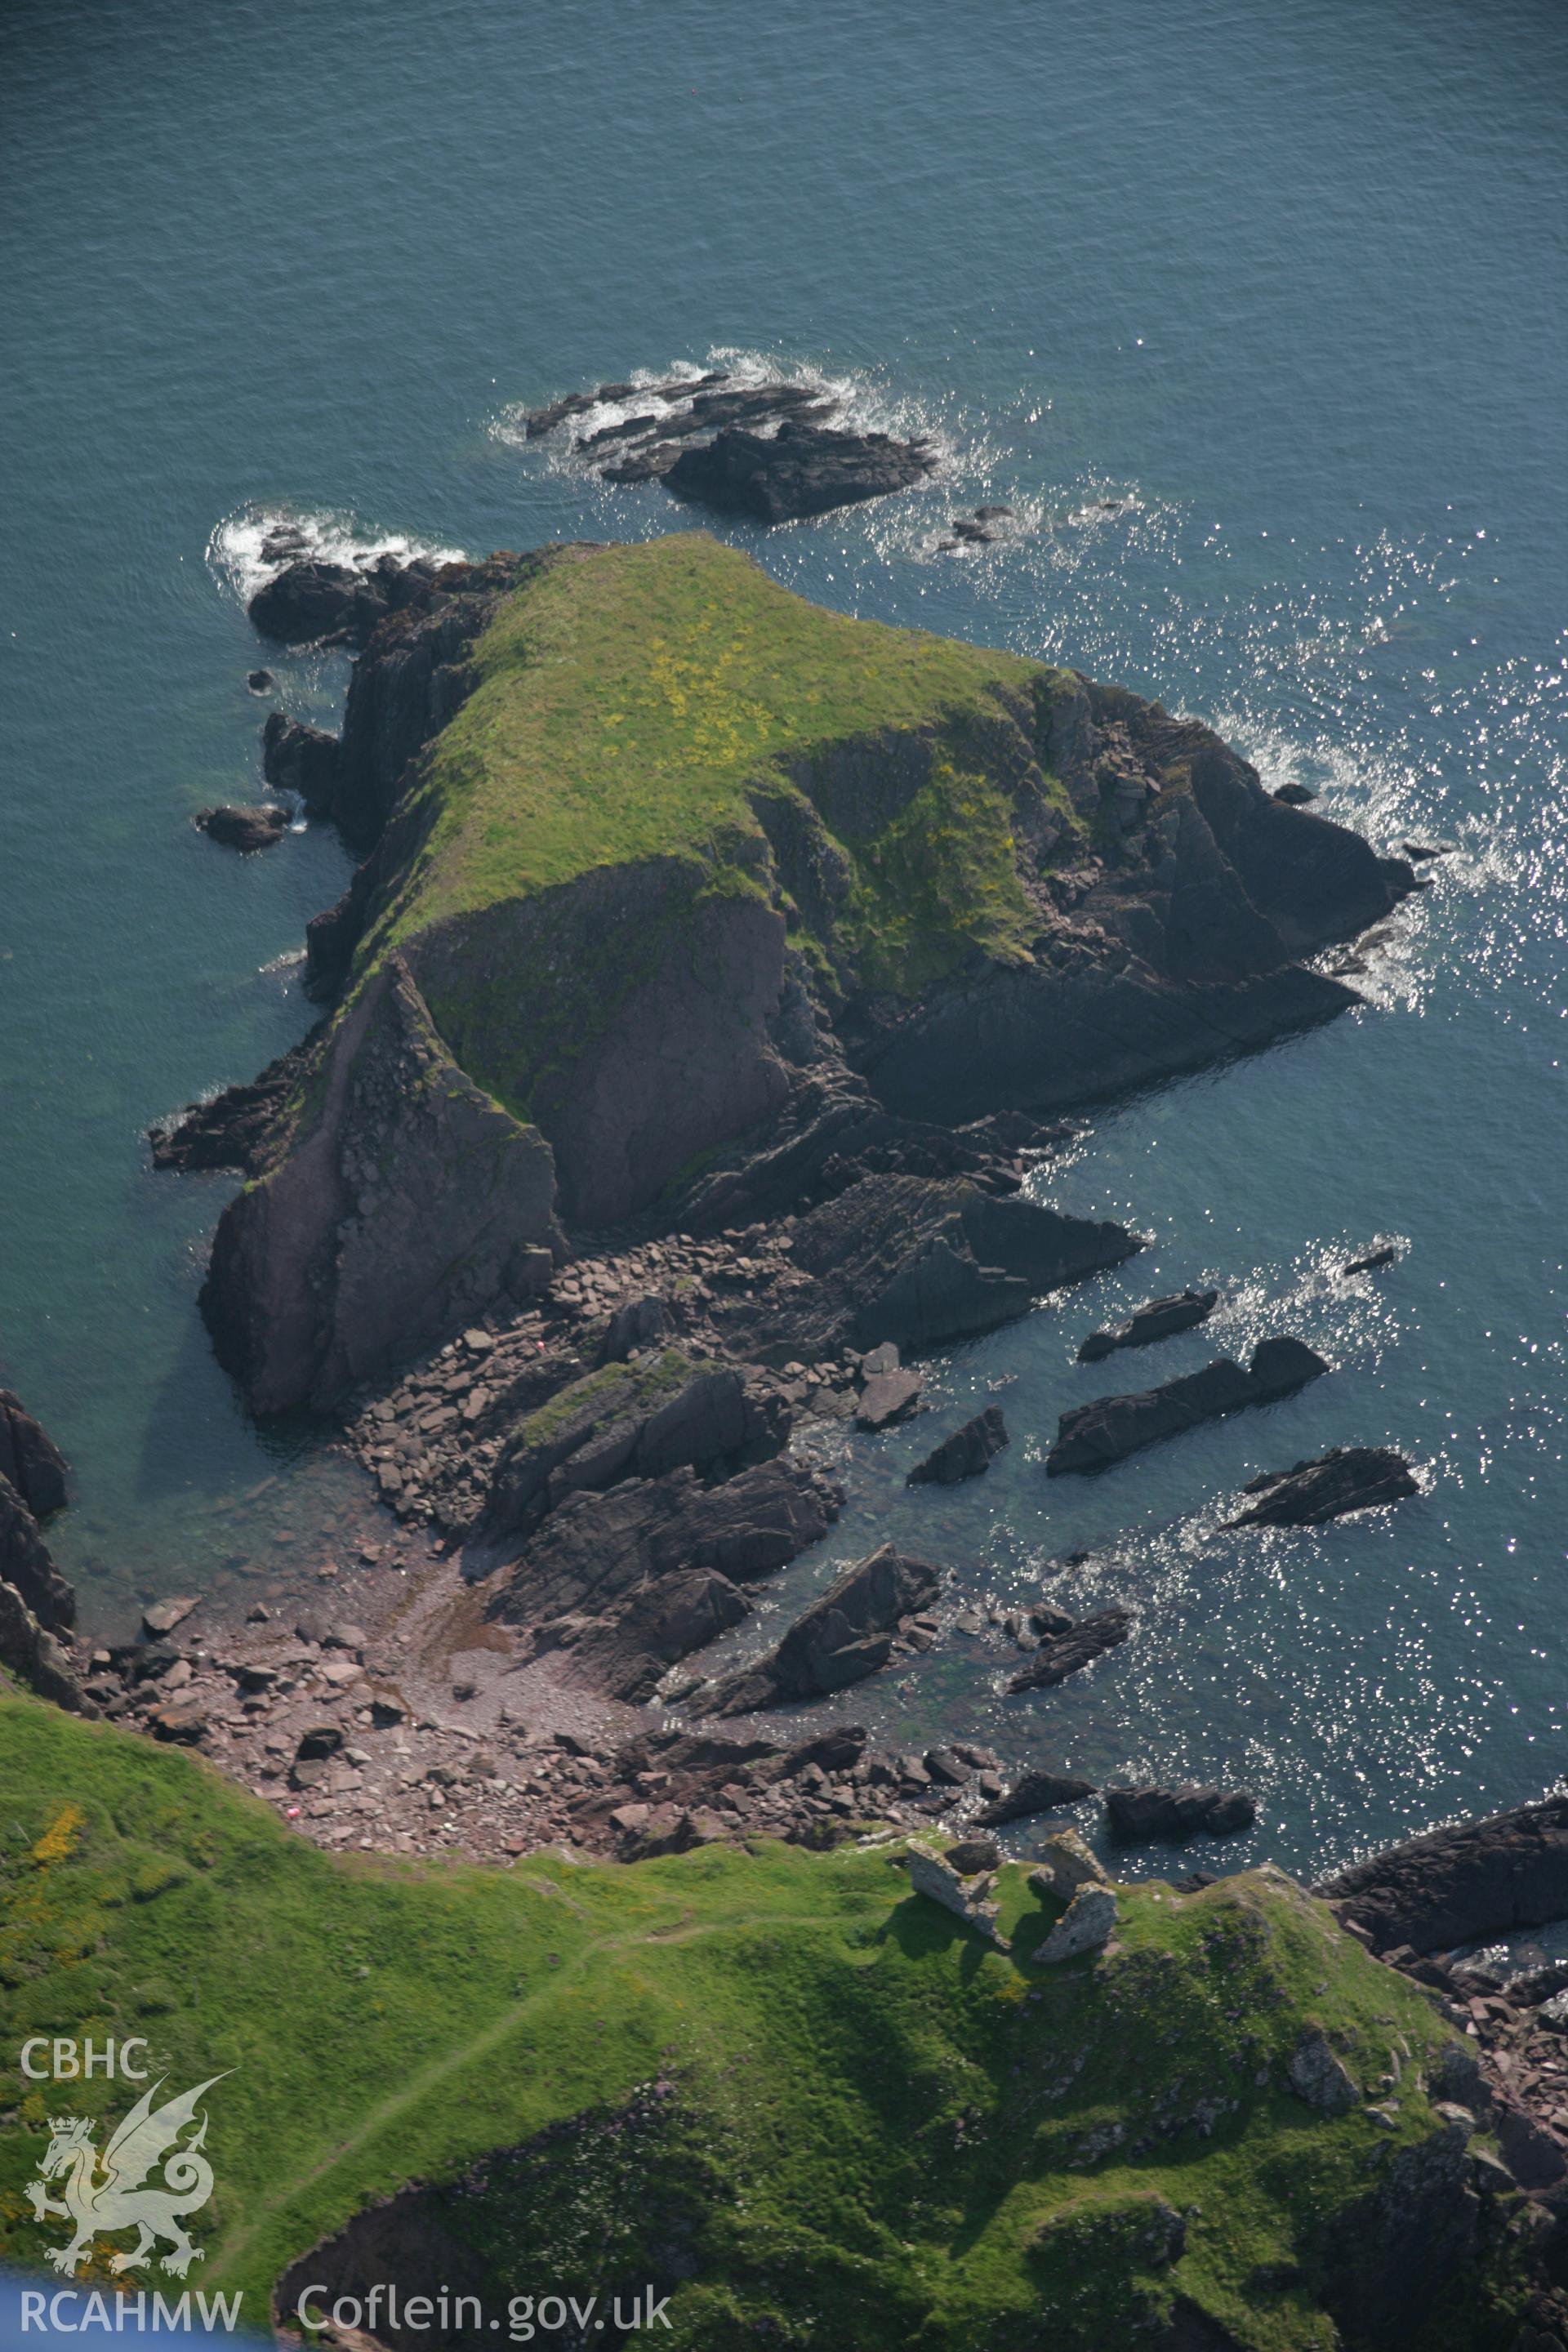 RCAHMW colour oblique aerial photograph of East Blockhouse, Angle, viewed from the north-east and showing Rat Island. Taken on 08 June 2006 by Toby Driver.